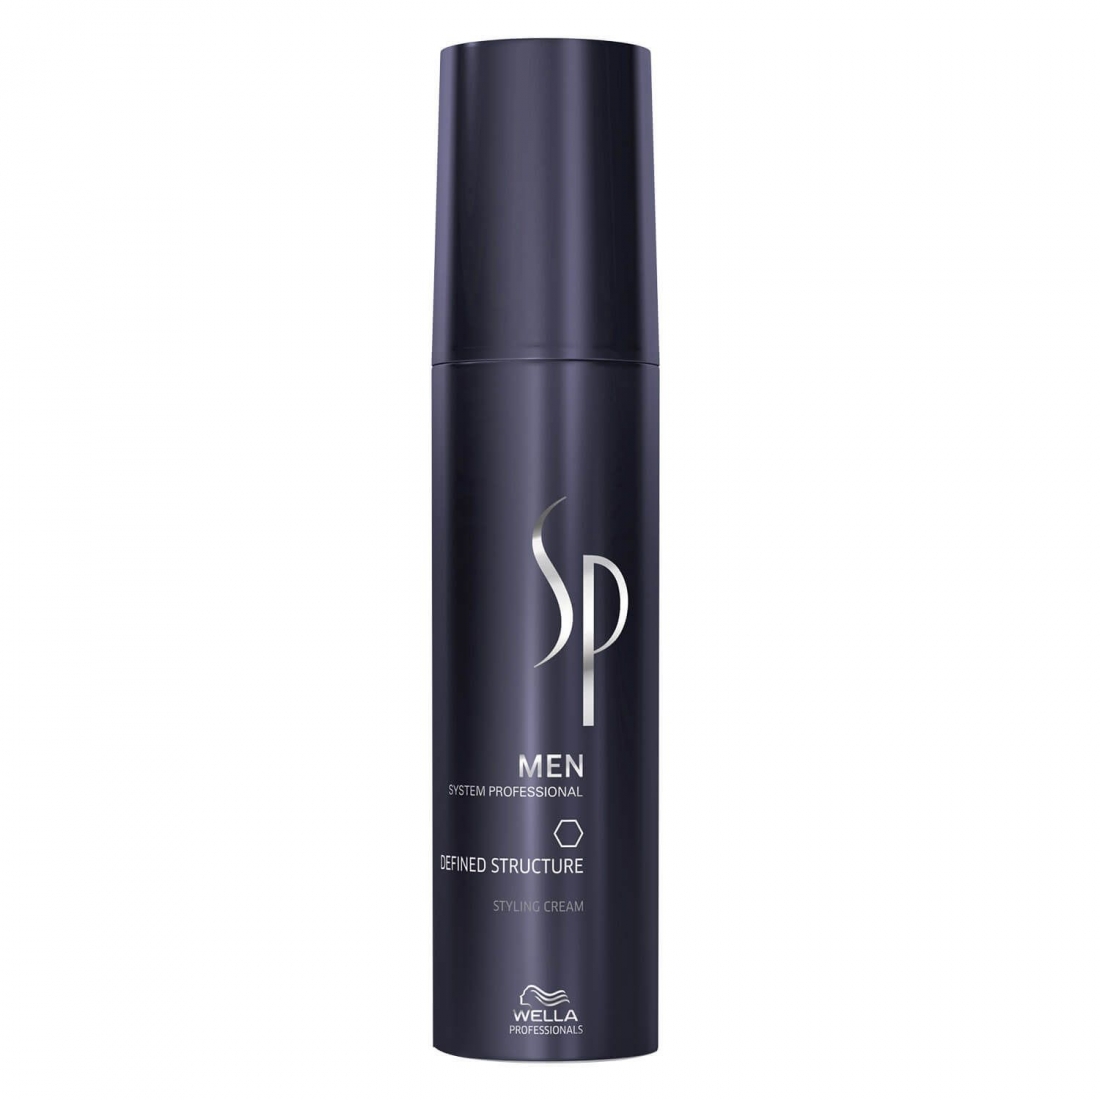 'Sp Defined Structure' Styling Cream - 100 ml